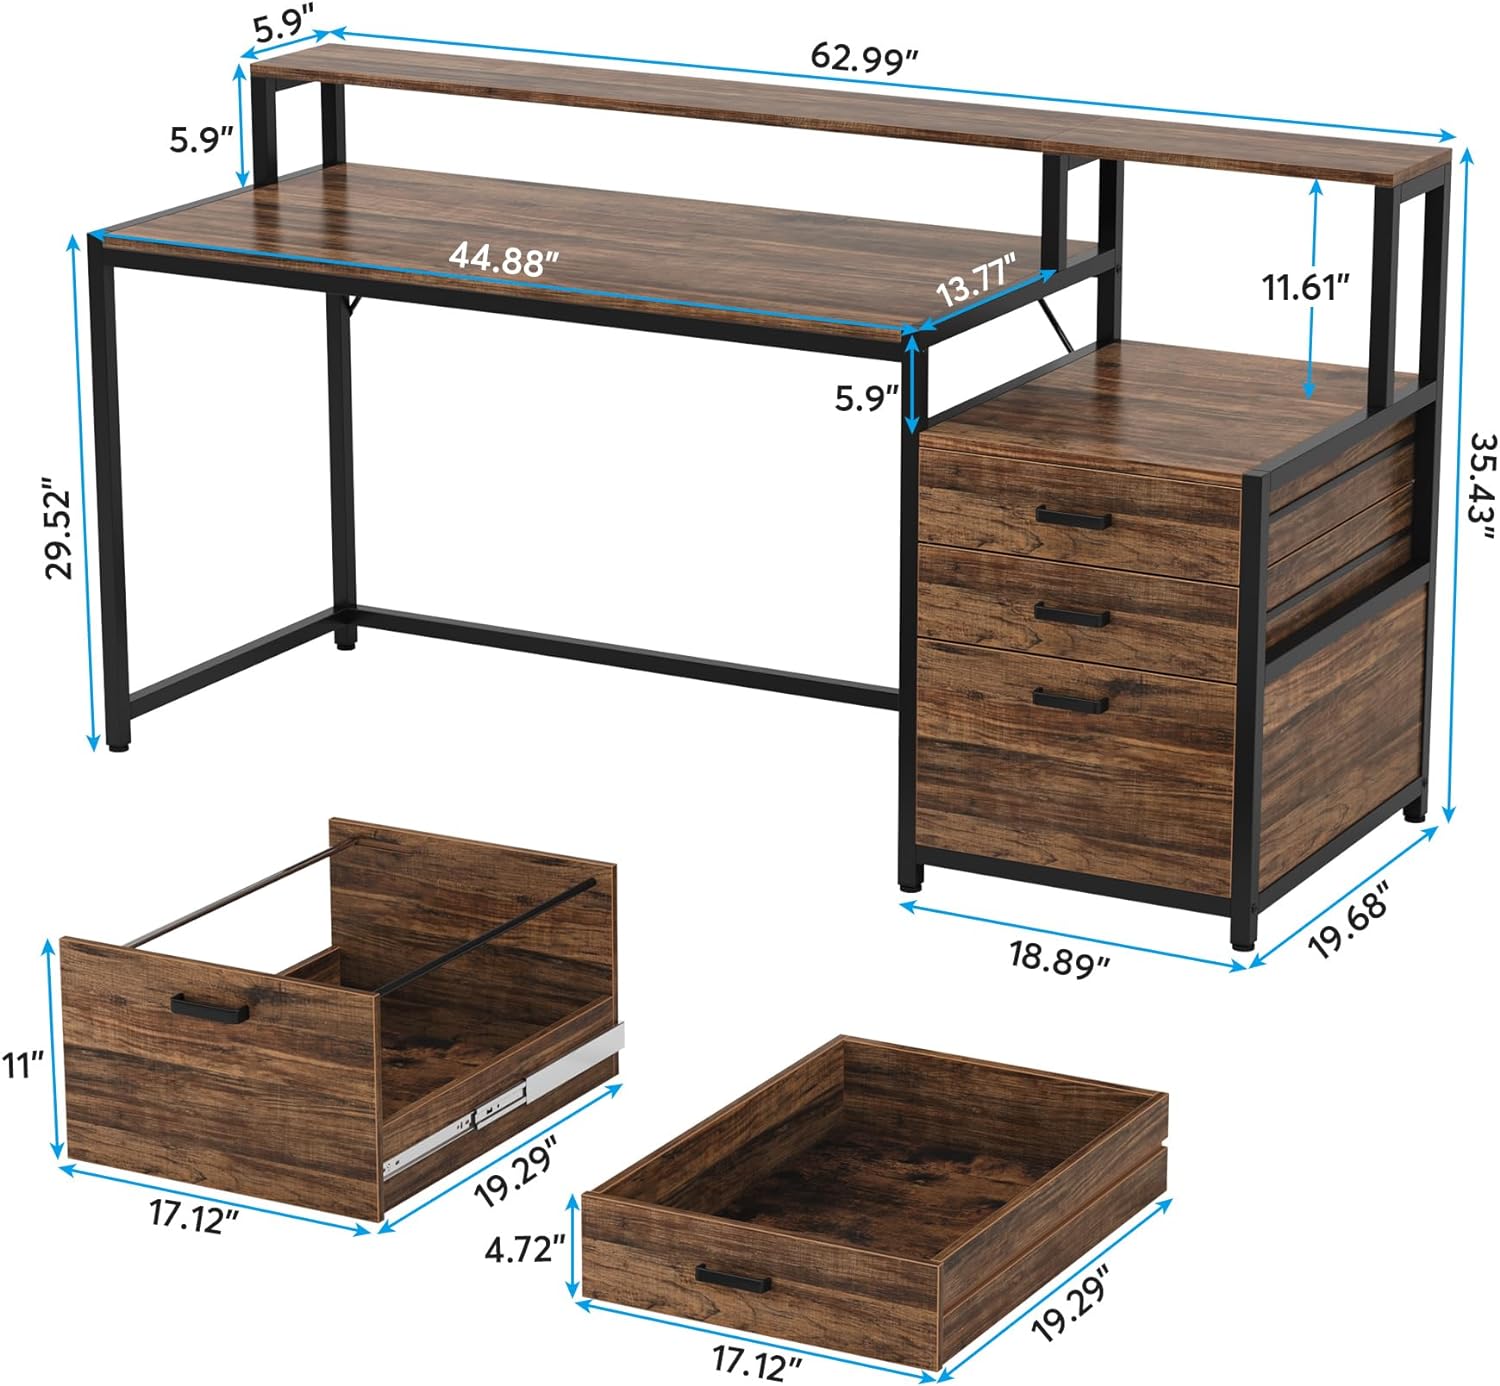 Tribesigns 63 Inch Computer Desk with File Drawer Cabinet, Ergonomic Office Desk with Monitor Stand